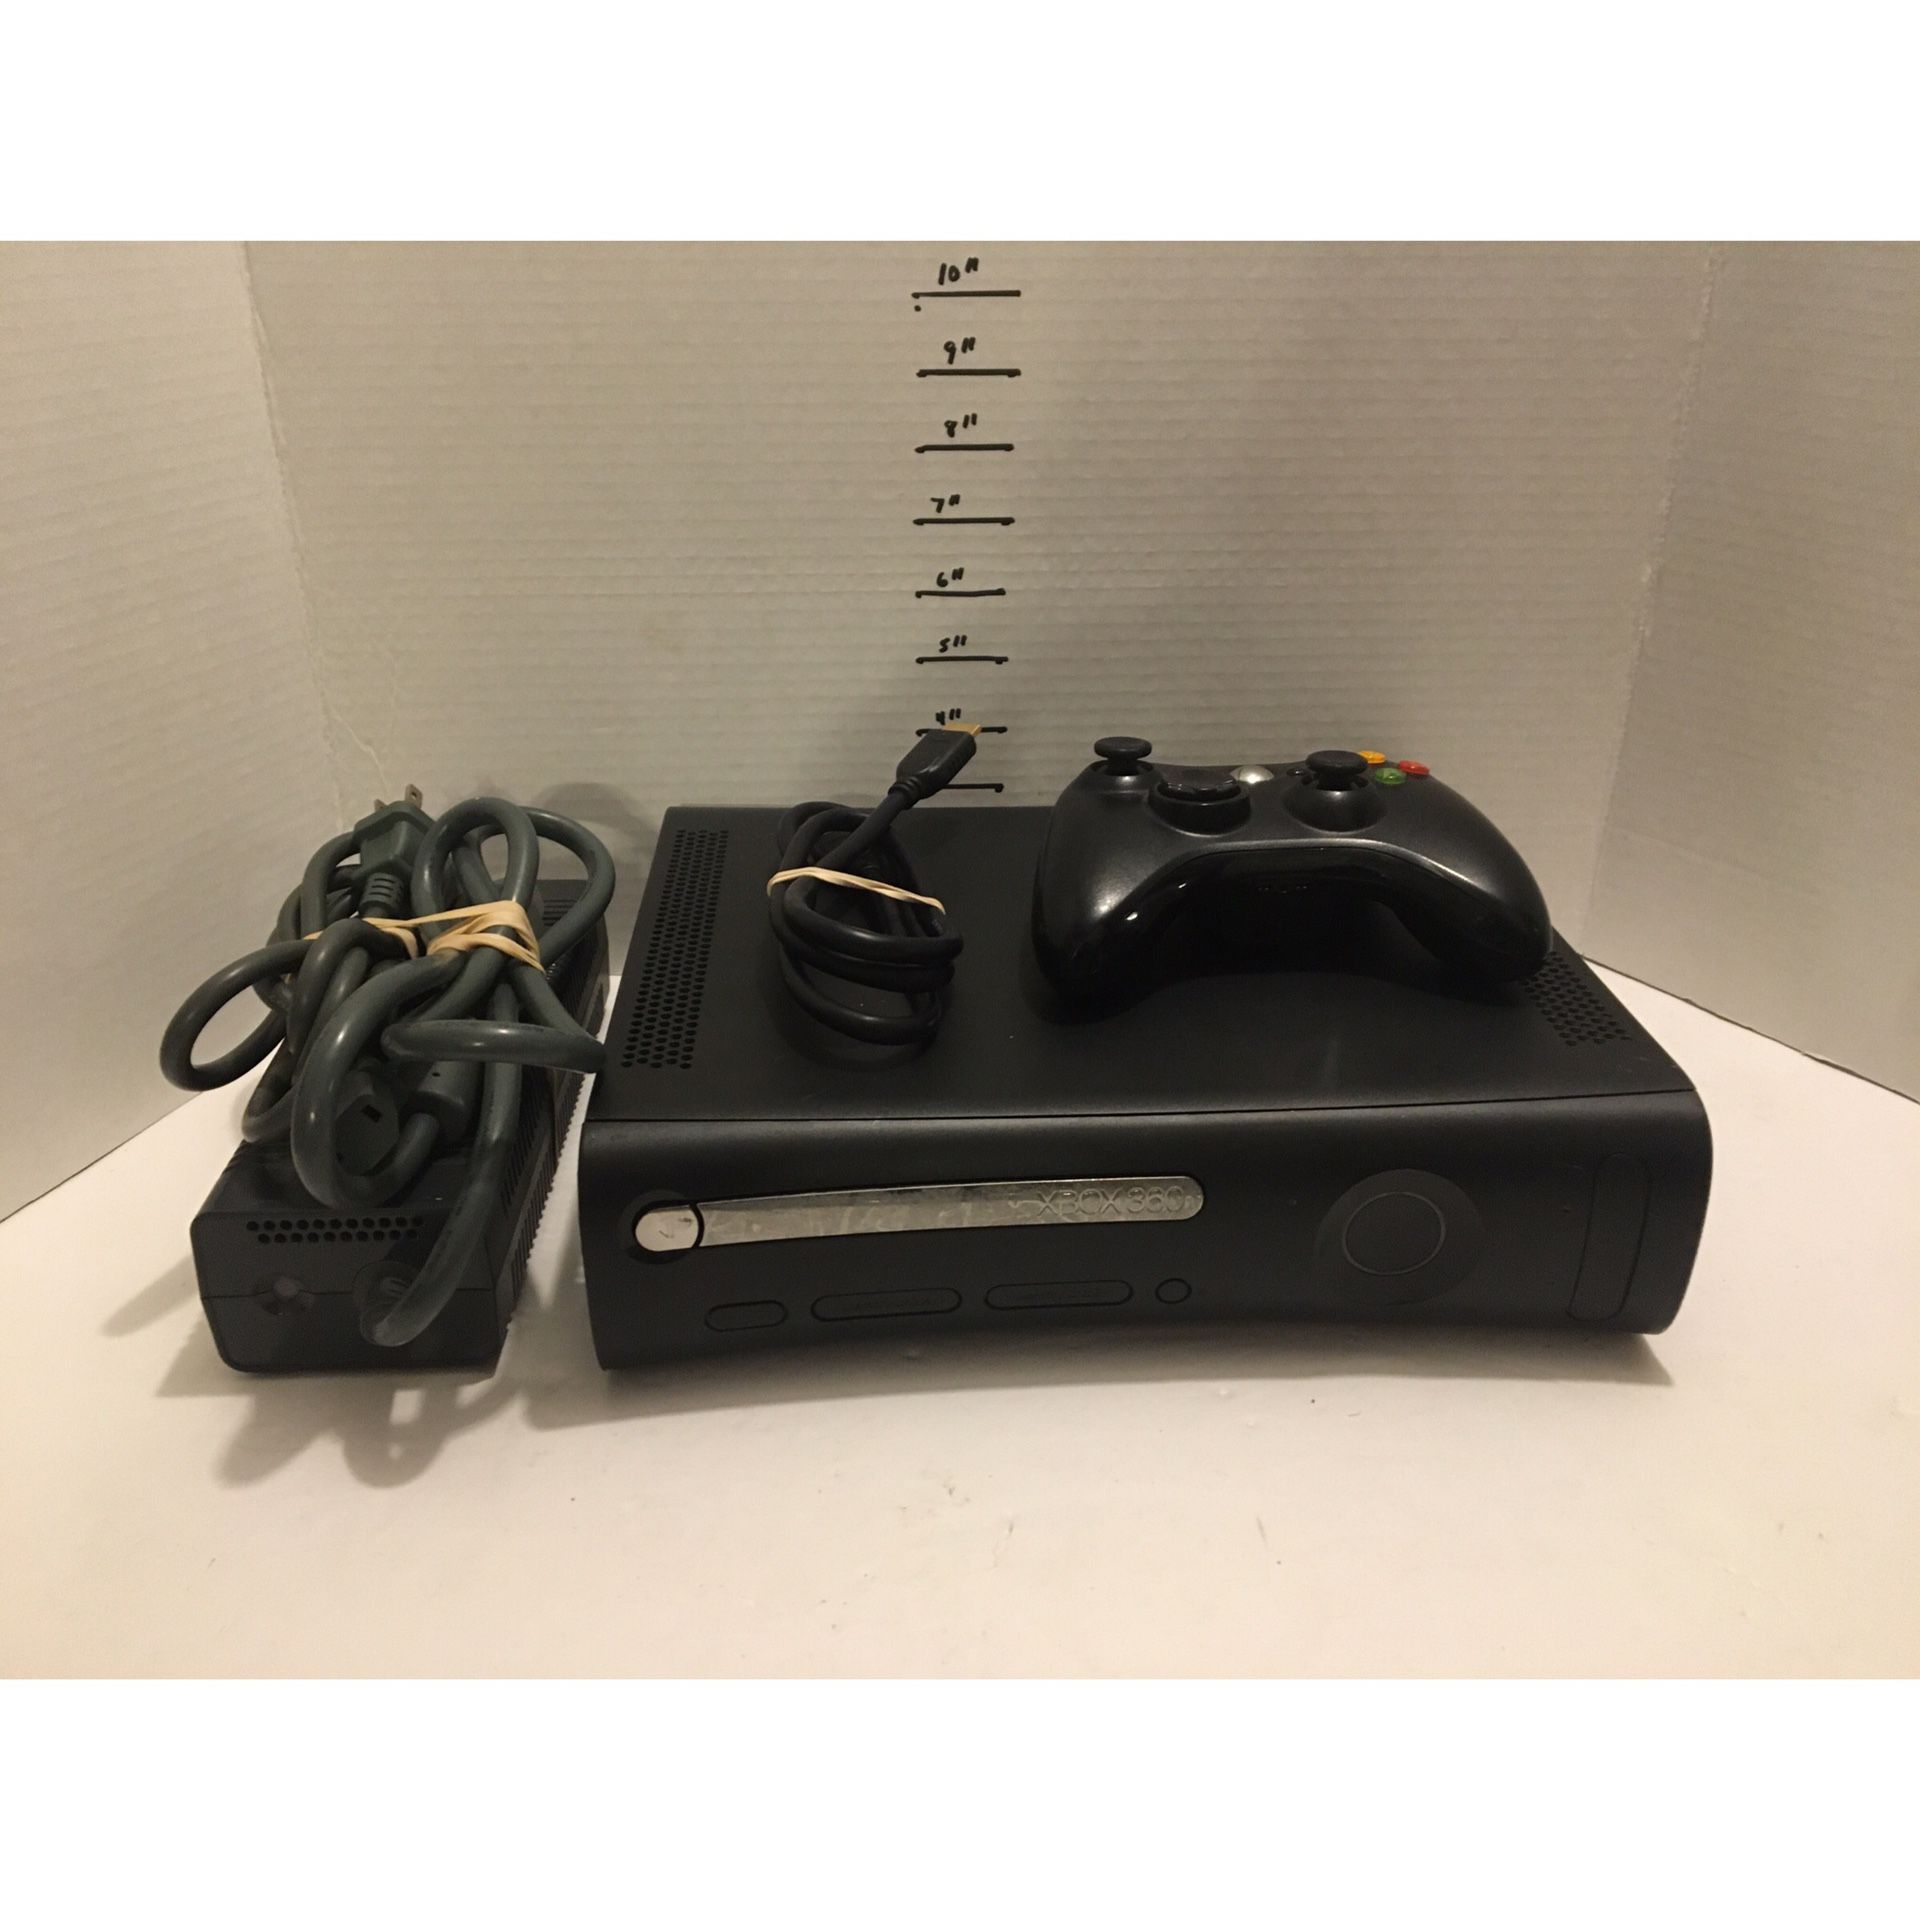 Microsoft Xbox 360 Black Video Game System Console 100% Complete